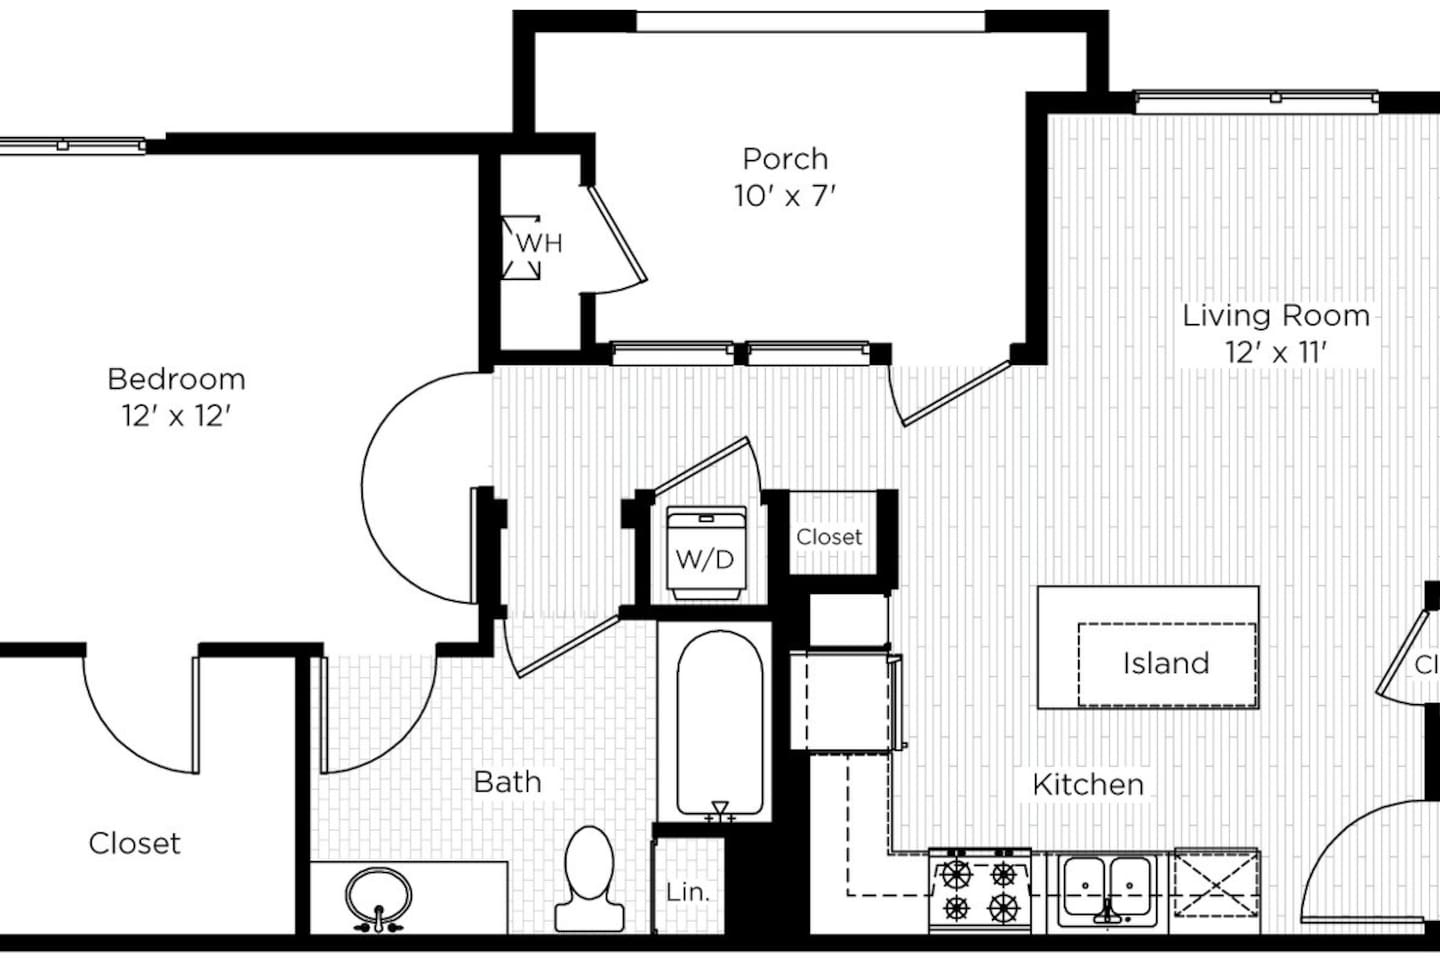 Floorplan diagram for The Aster North - 1DB, showing 1 bedroom